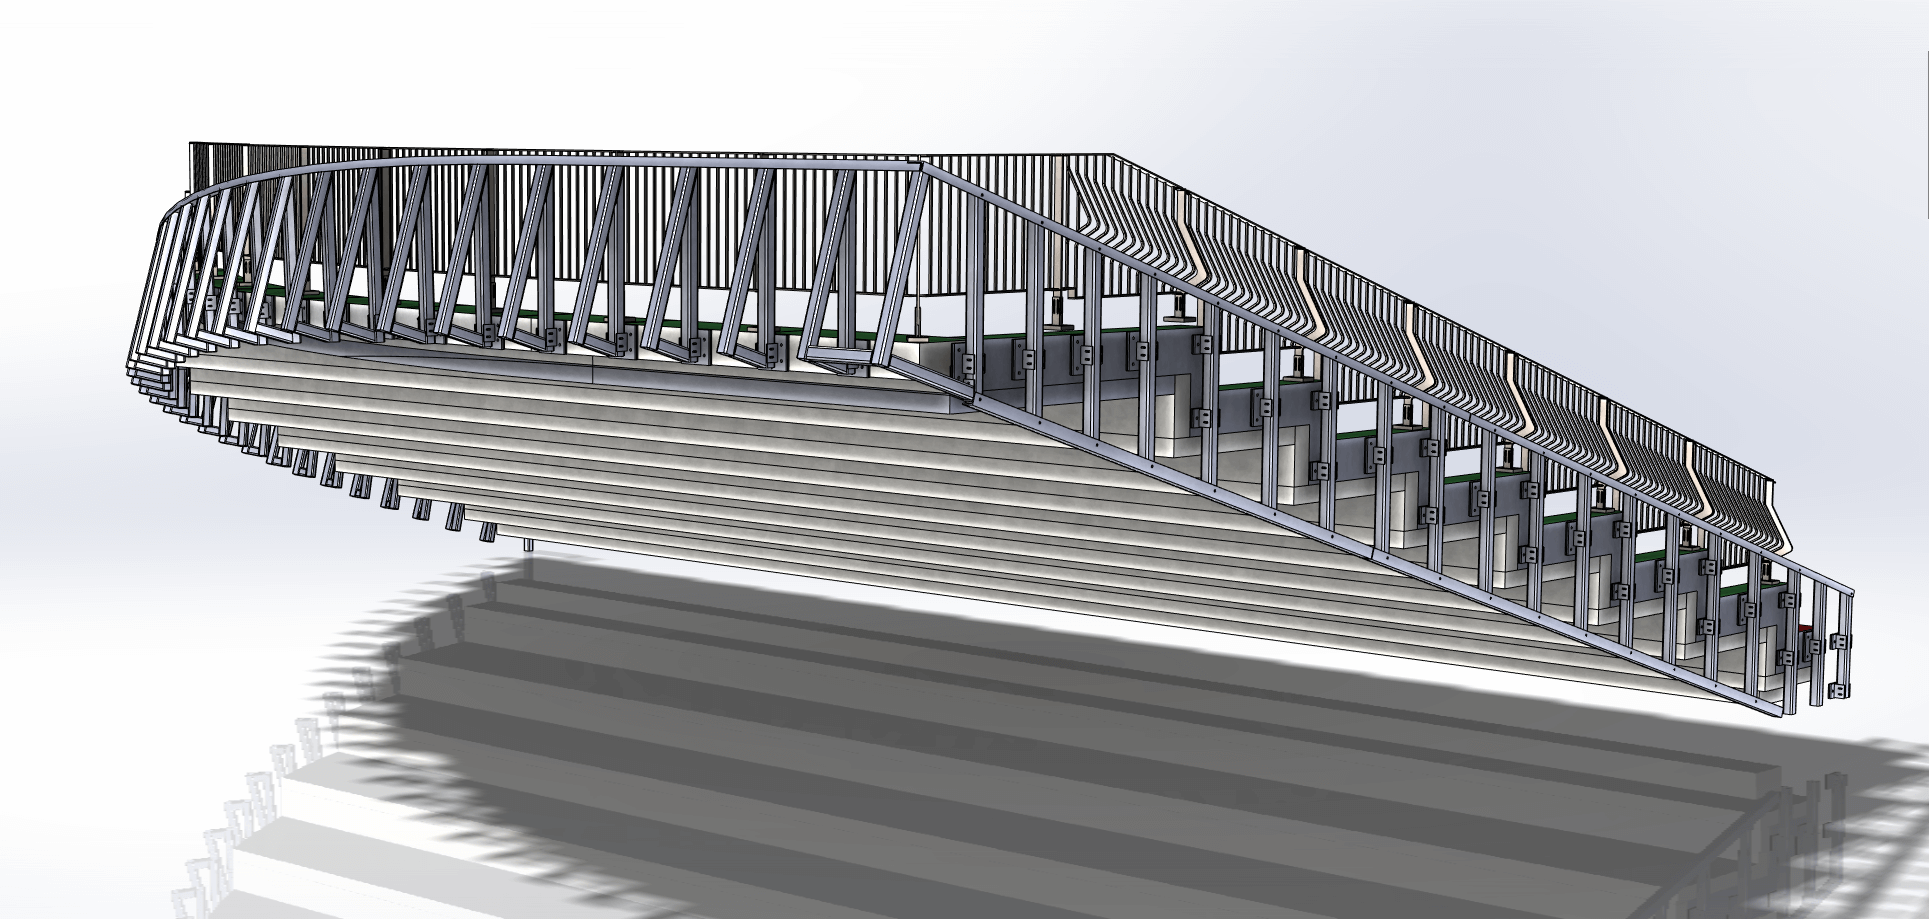 Organically shaped staging an balustrades in SOLIDWORKS by Bowland CAD Services